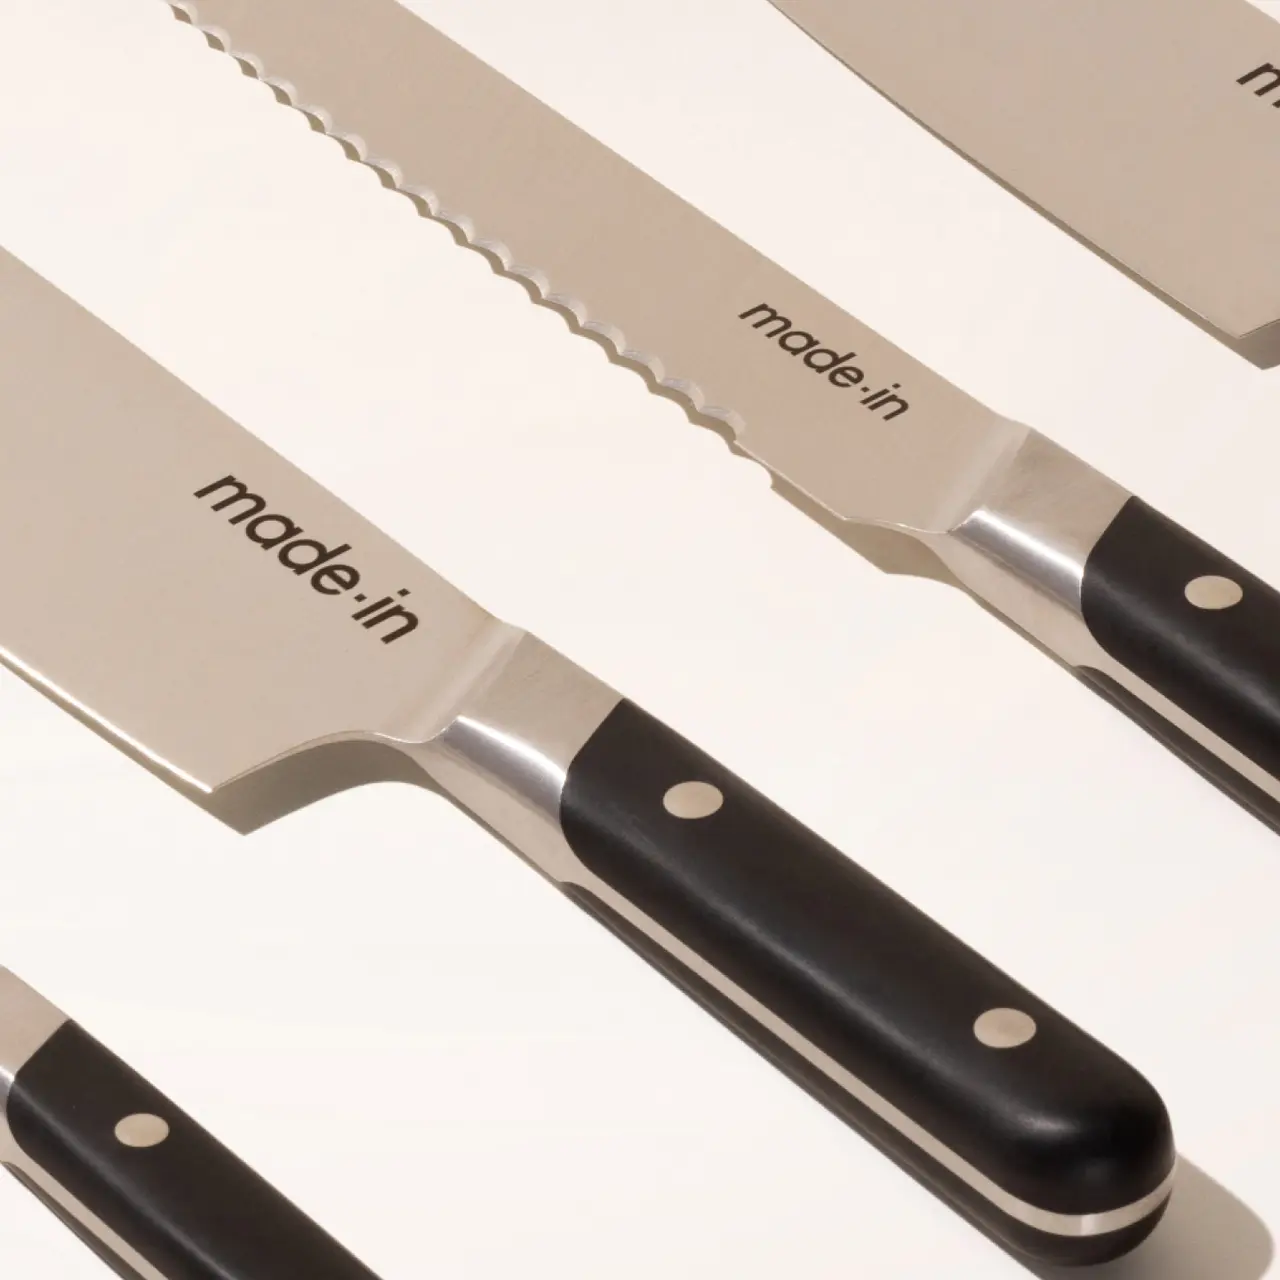 Two serrated kitchen knives with black handles and the inscription "made in" on the blade, angled and overlapping each other on a plain background.